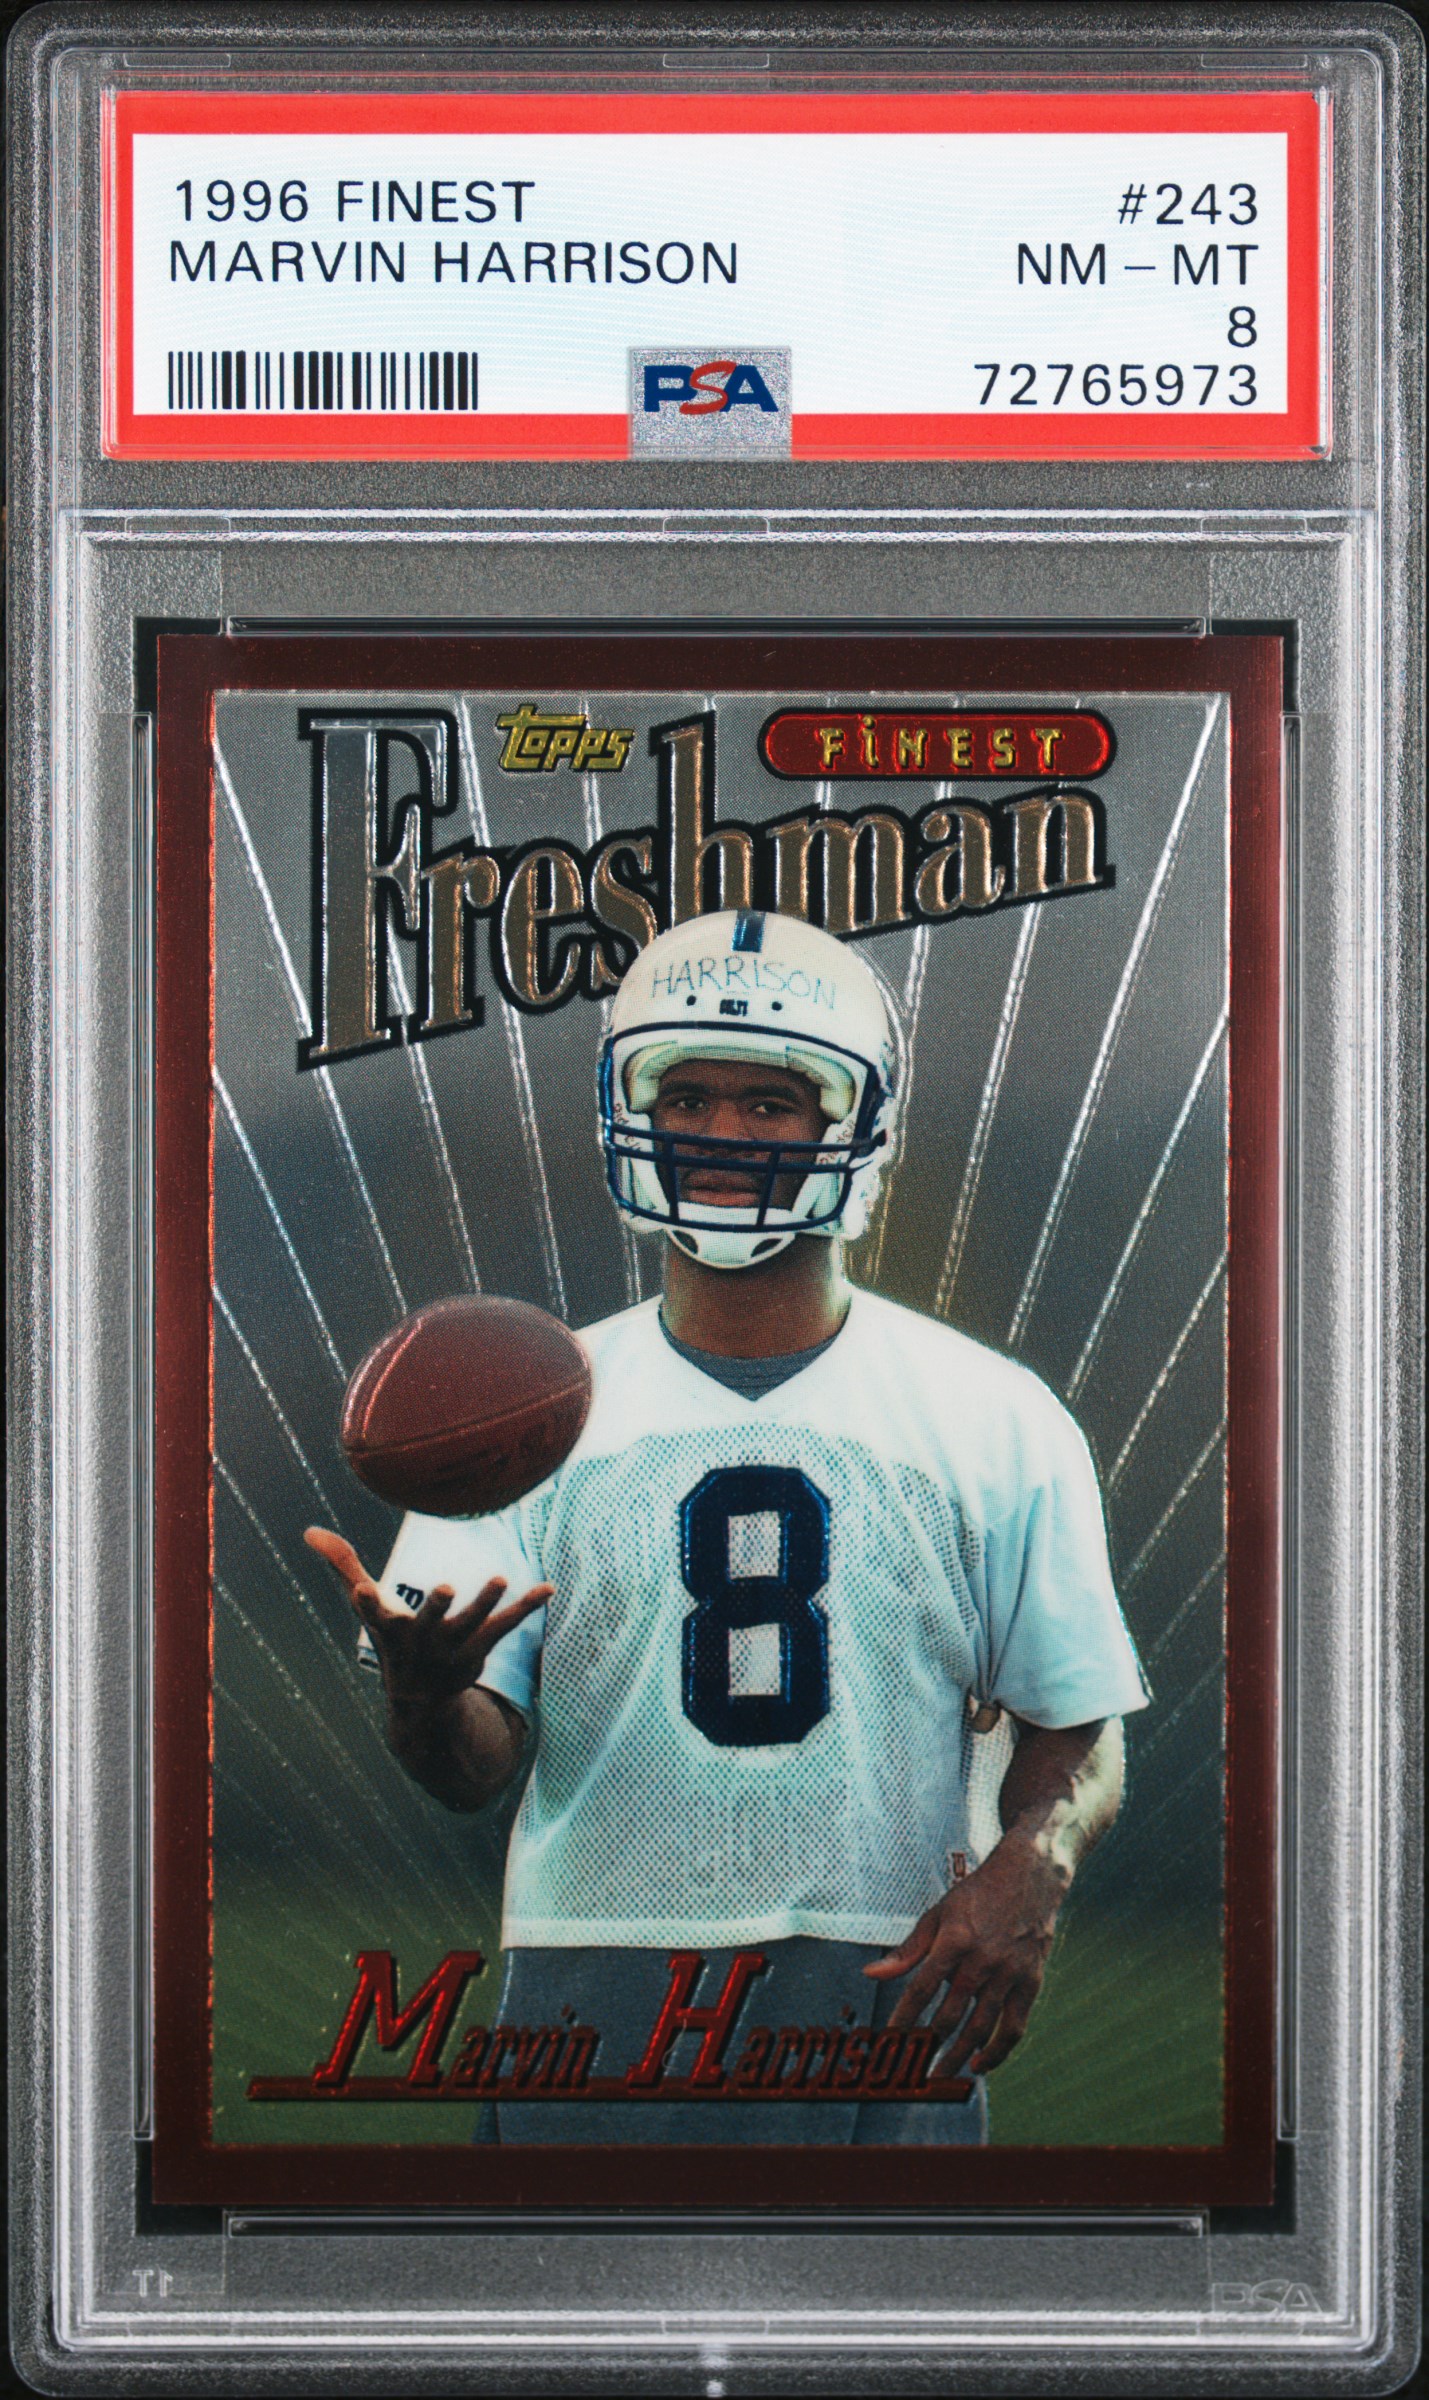 1996 Topps Finest #243 Marvin Harrison Rookie Card – PSA NM-MT 8